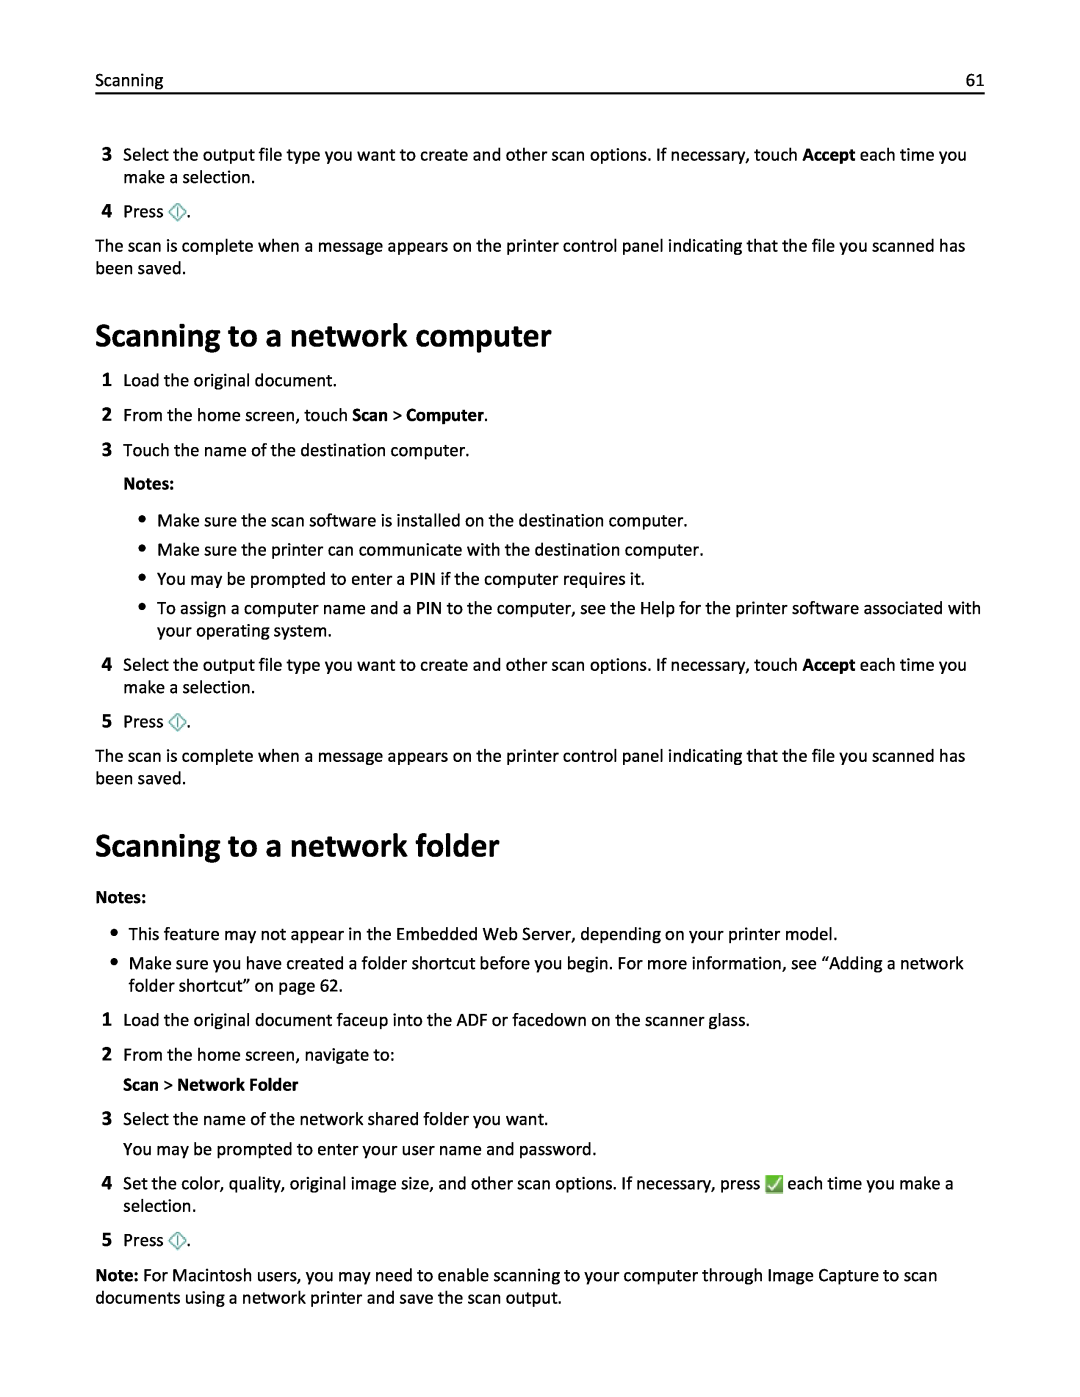 Lexmark 200, 20E manual Scanning to a network computer, Scanning to a network folder, Notes 